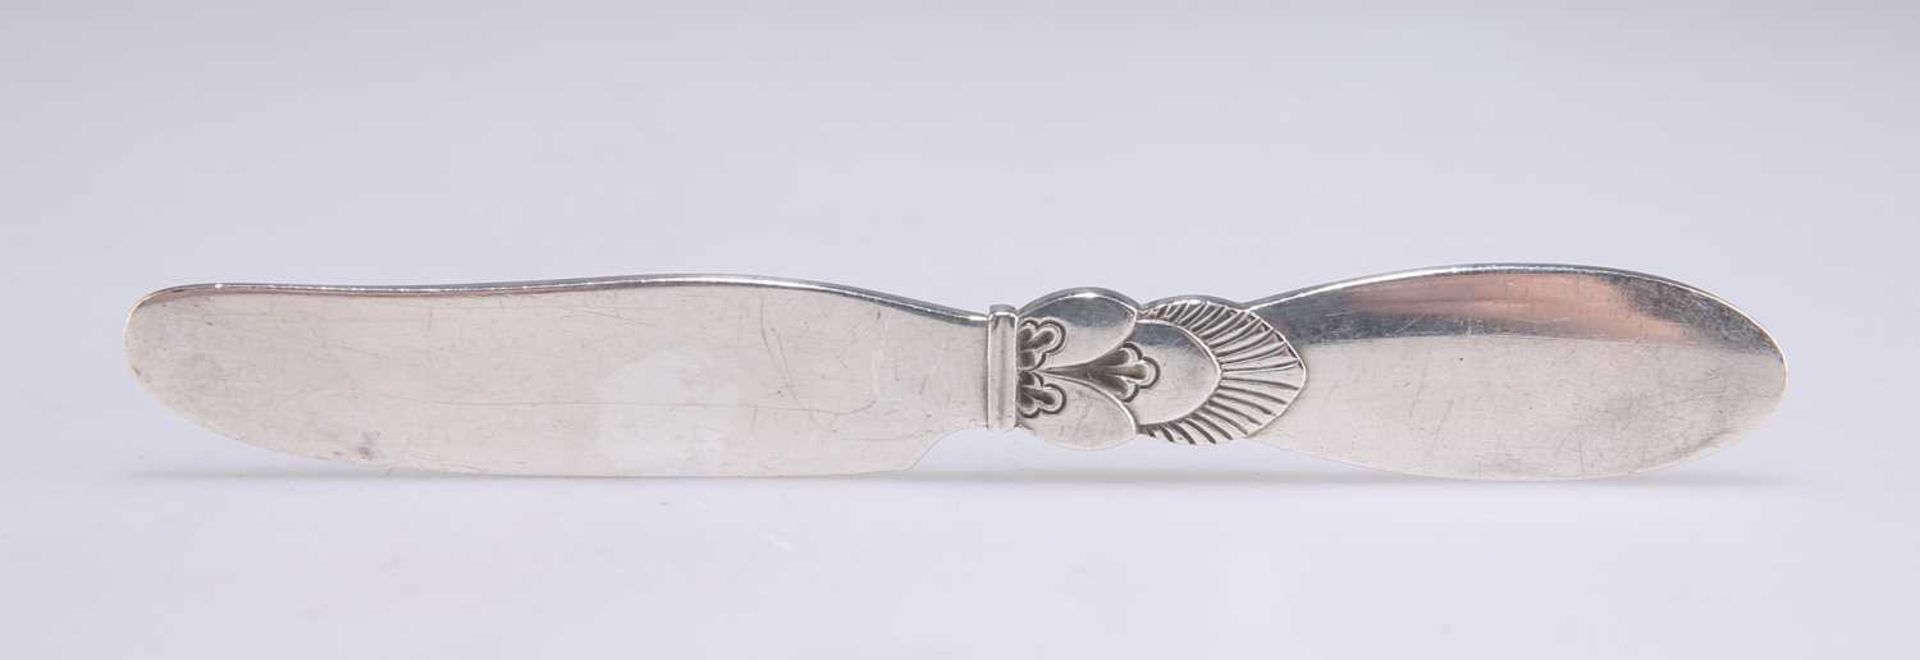 GEORG JENSEN: A DANISH STERLING SILVER CACTUS PATTERN BUTTER KNIFE - Image 2 of 2